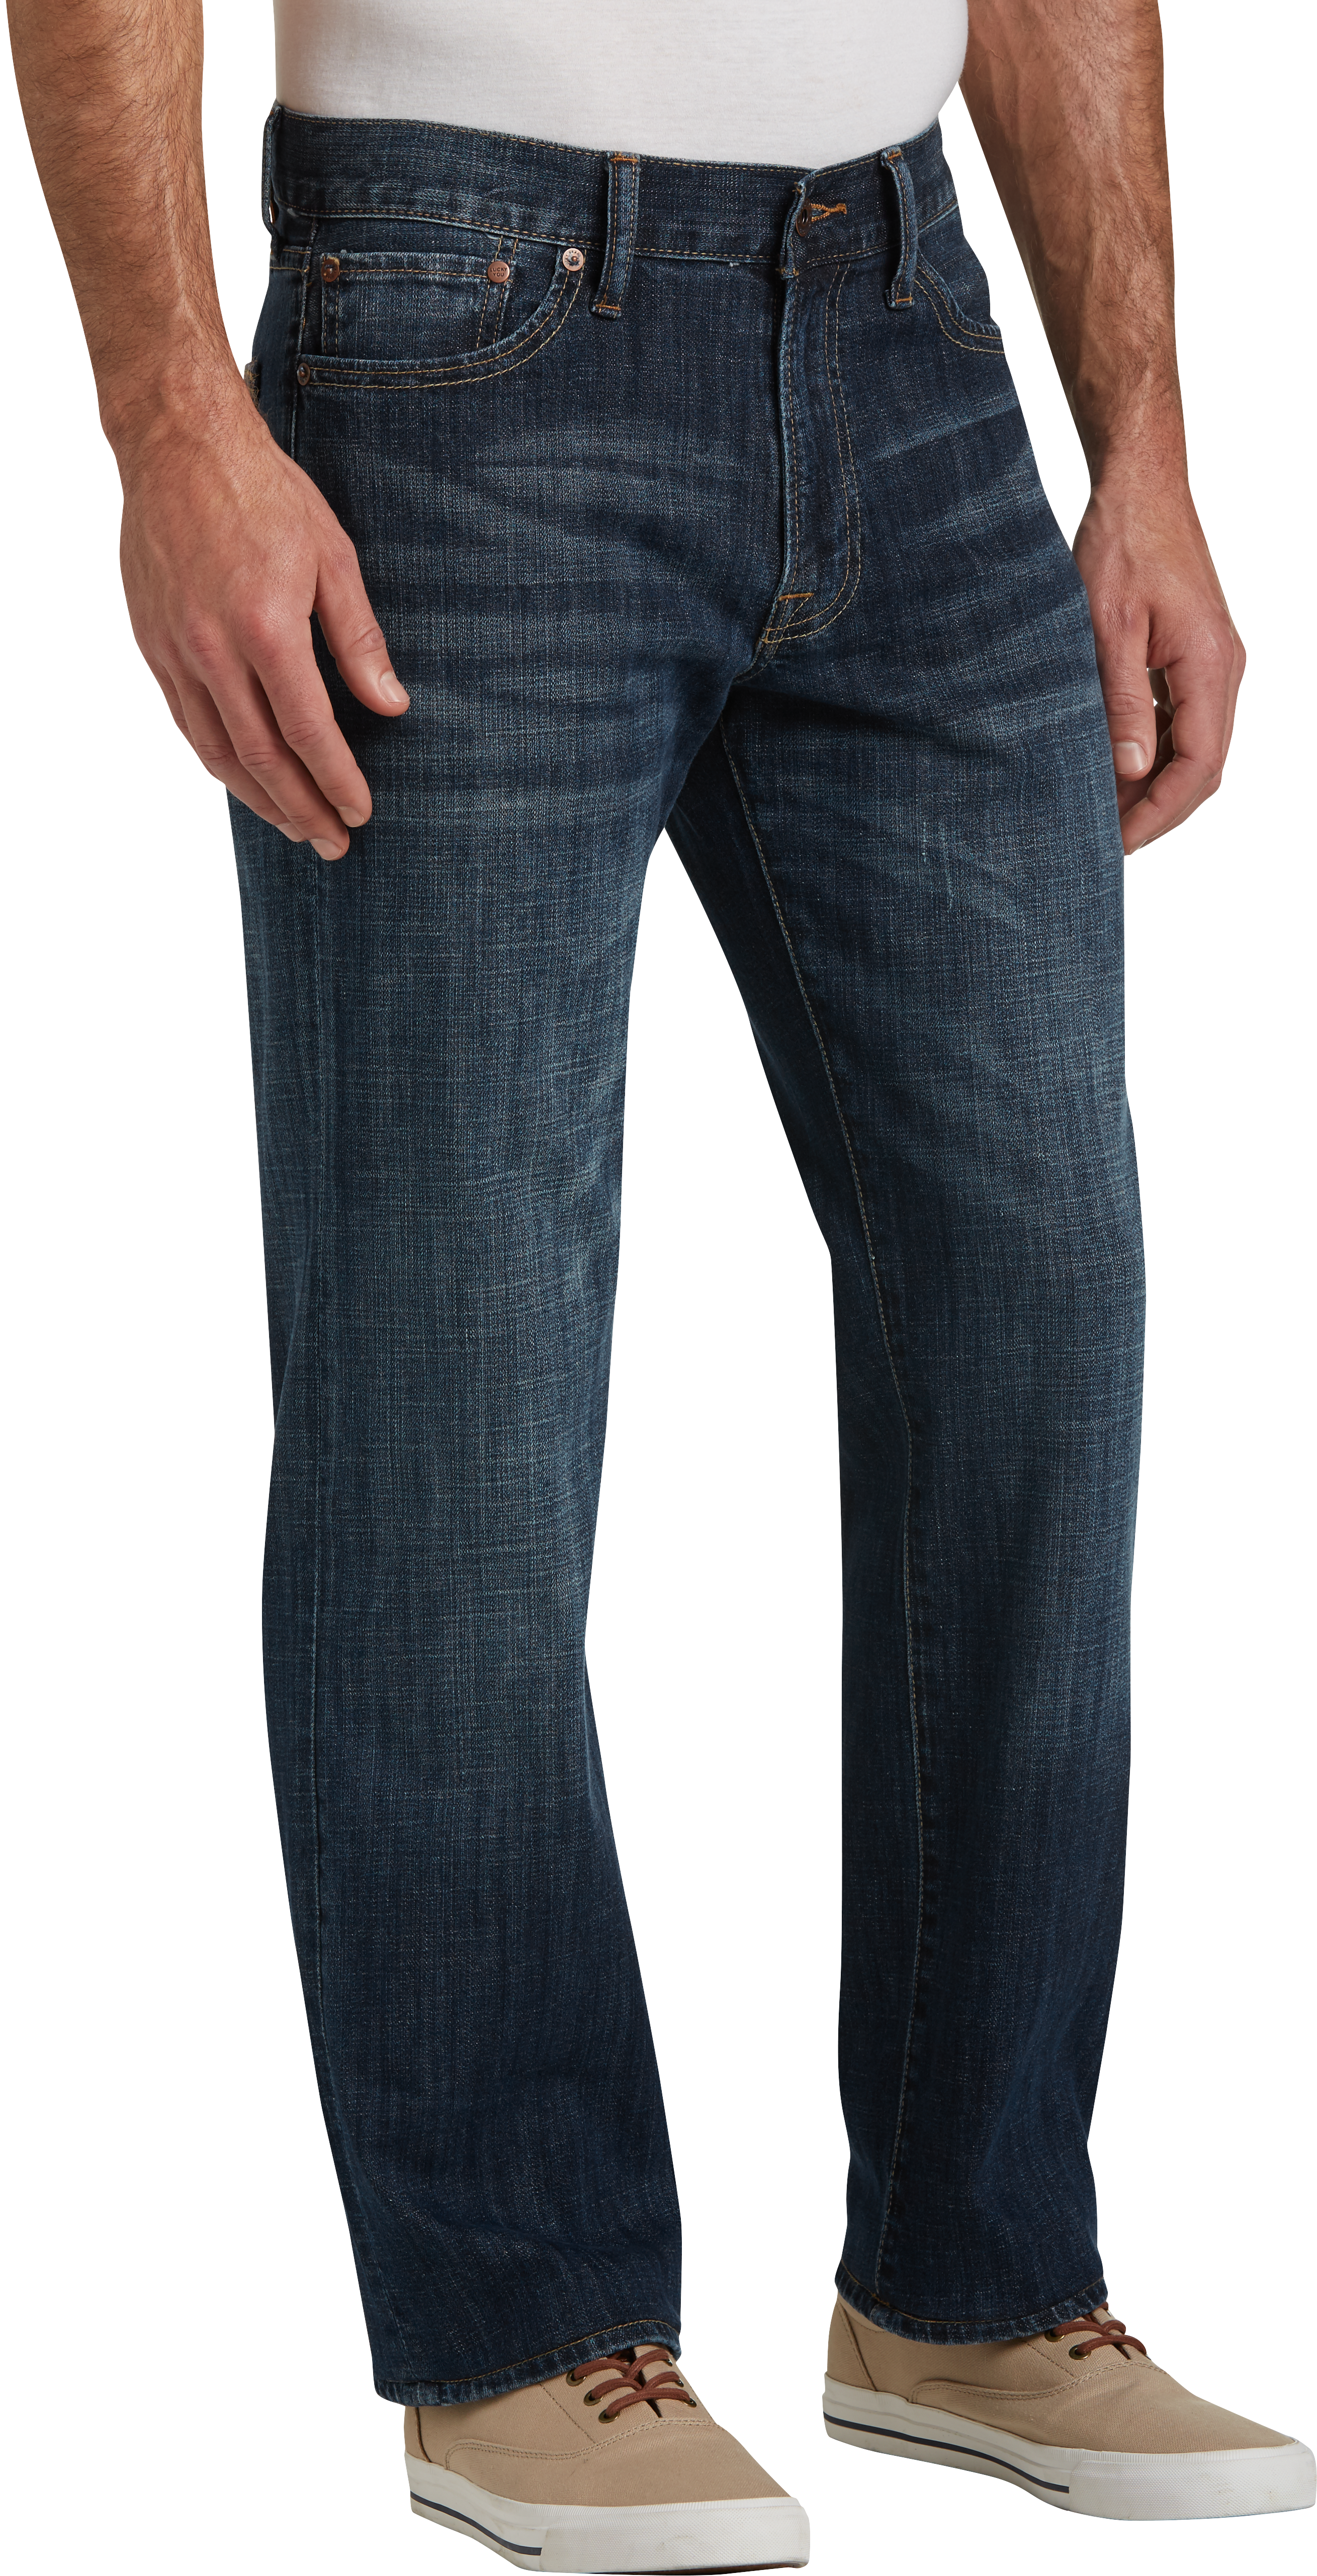 Lucky Brand 361 Greenfield Dark Wash Classic Fit Jeans - Men's Sale ...